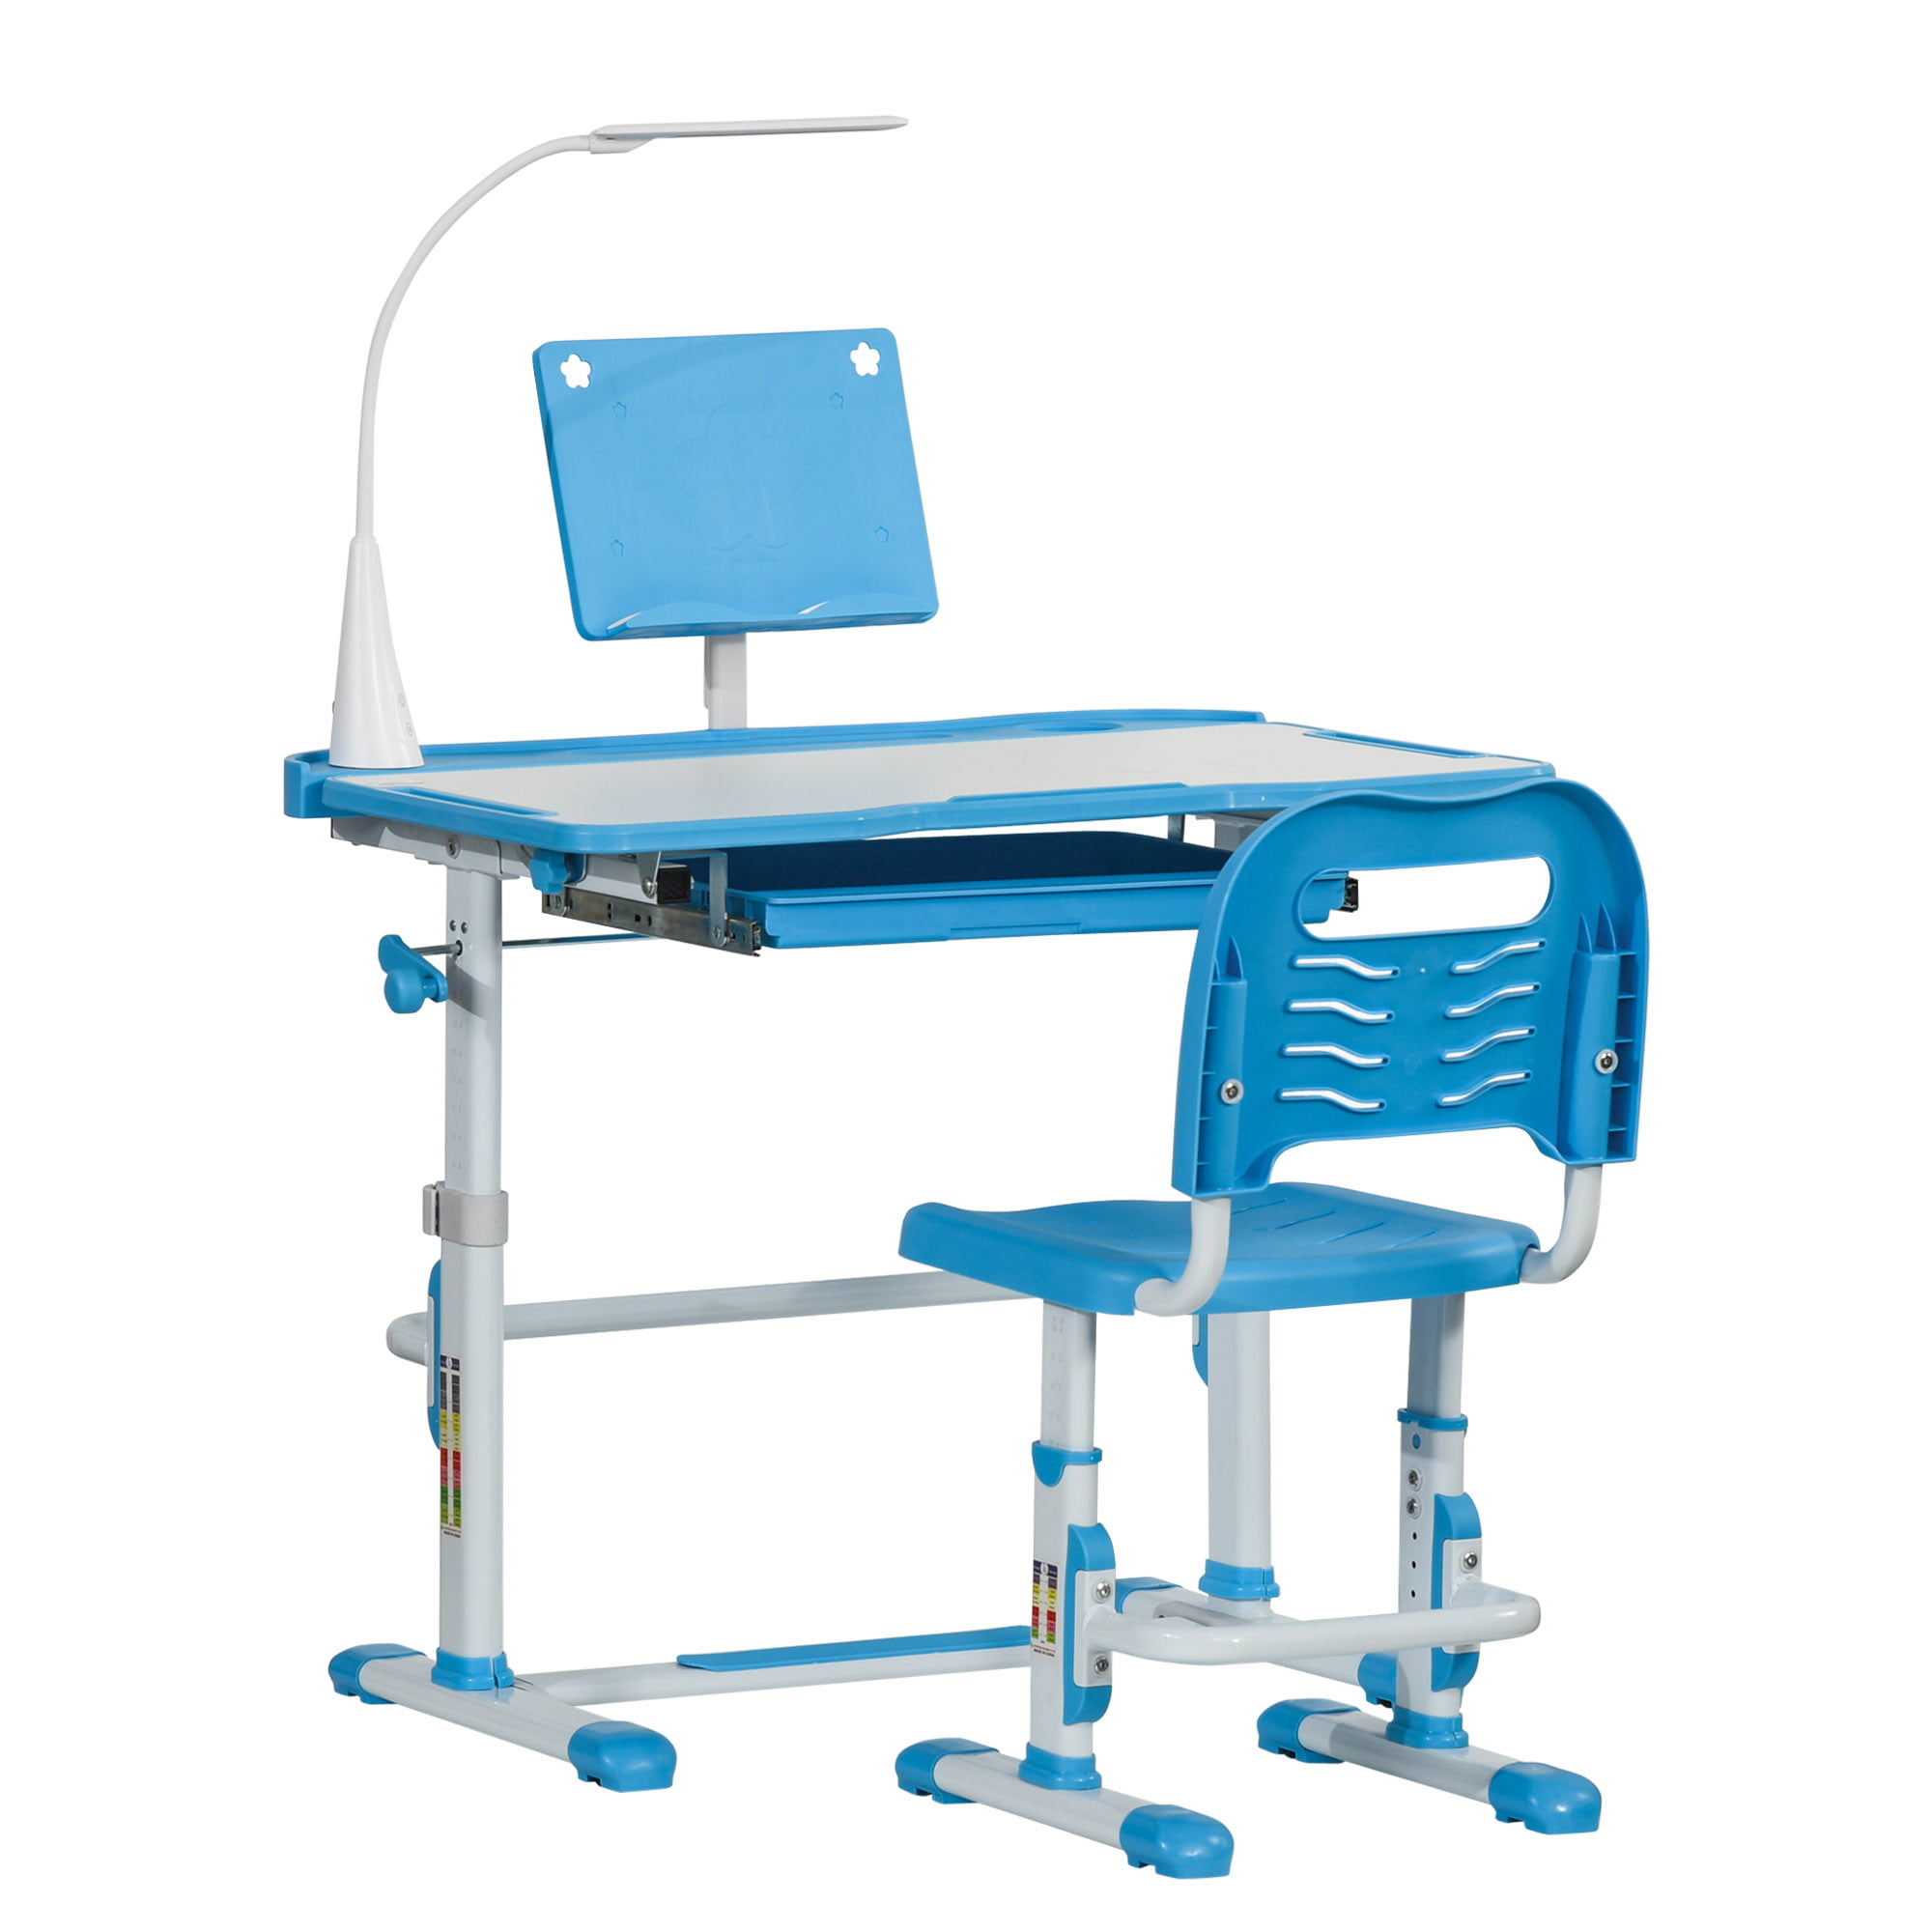 Details about   Adjustable 3 Colors Student Desk and Chair Set Child Study Table NEW 